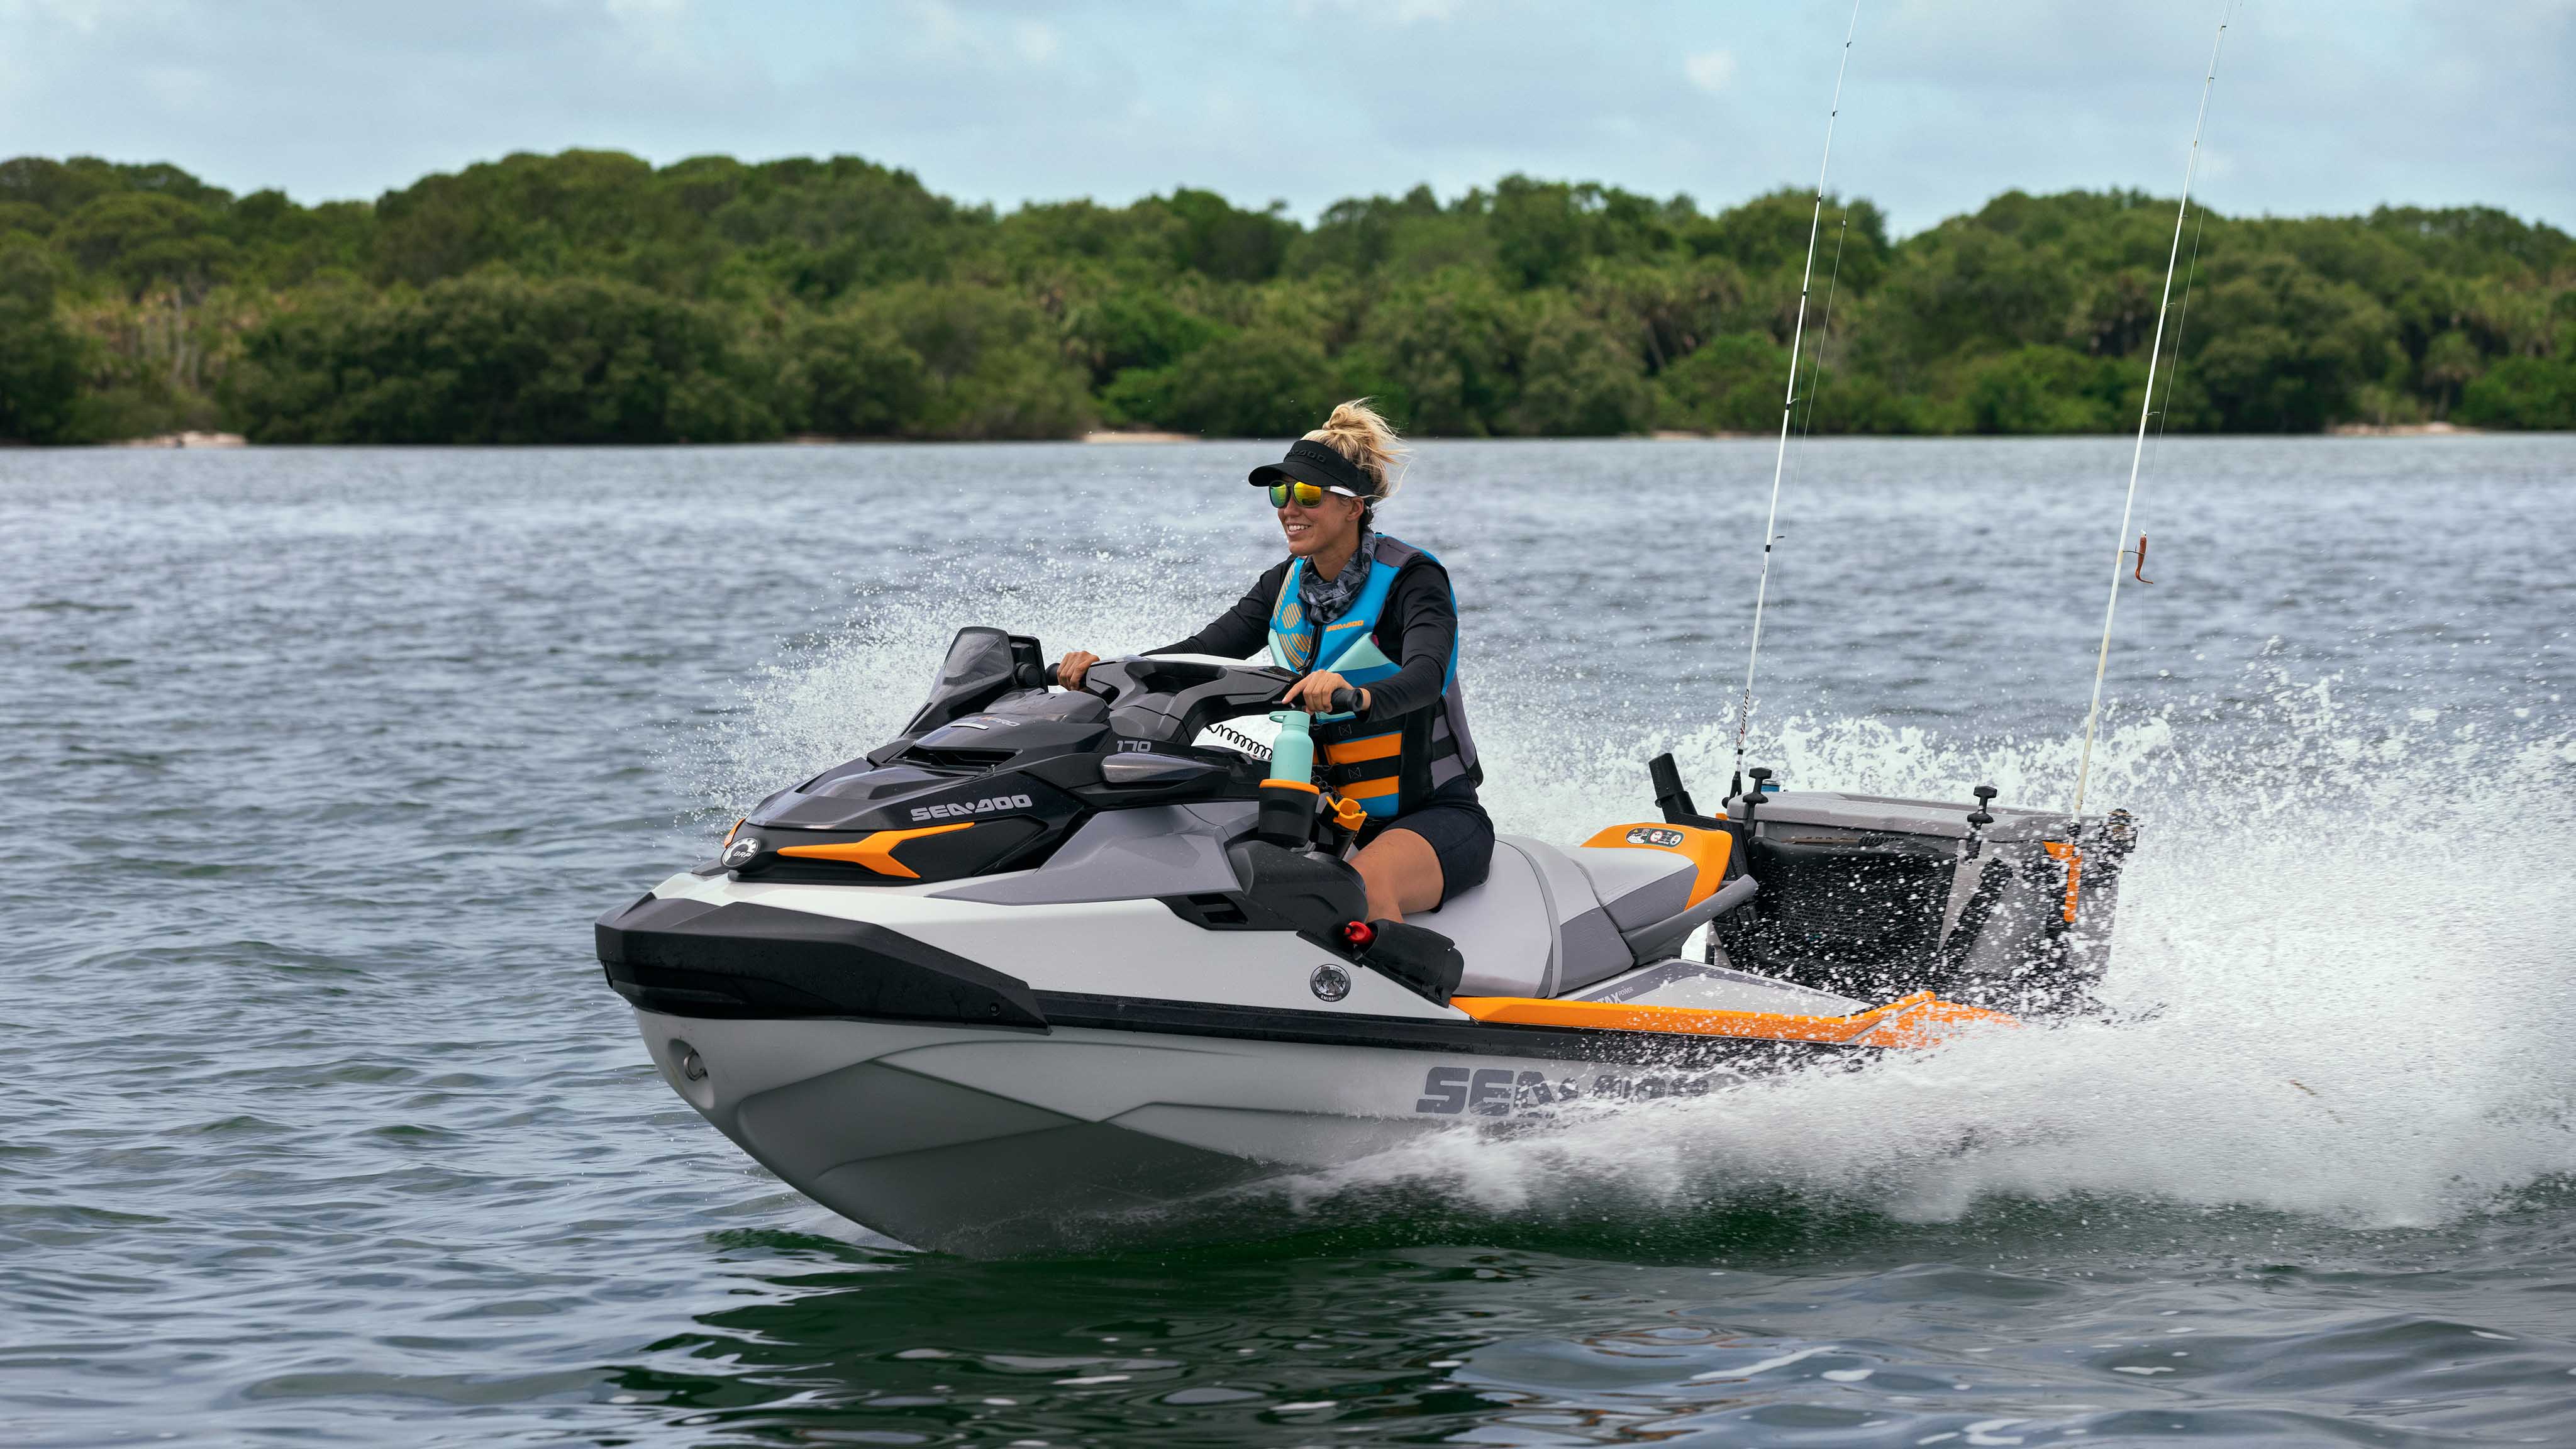 Woman riding her FishPro Trophy fullly equipped for fishing